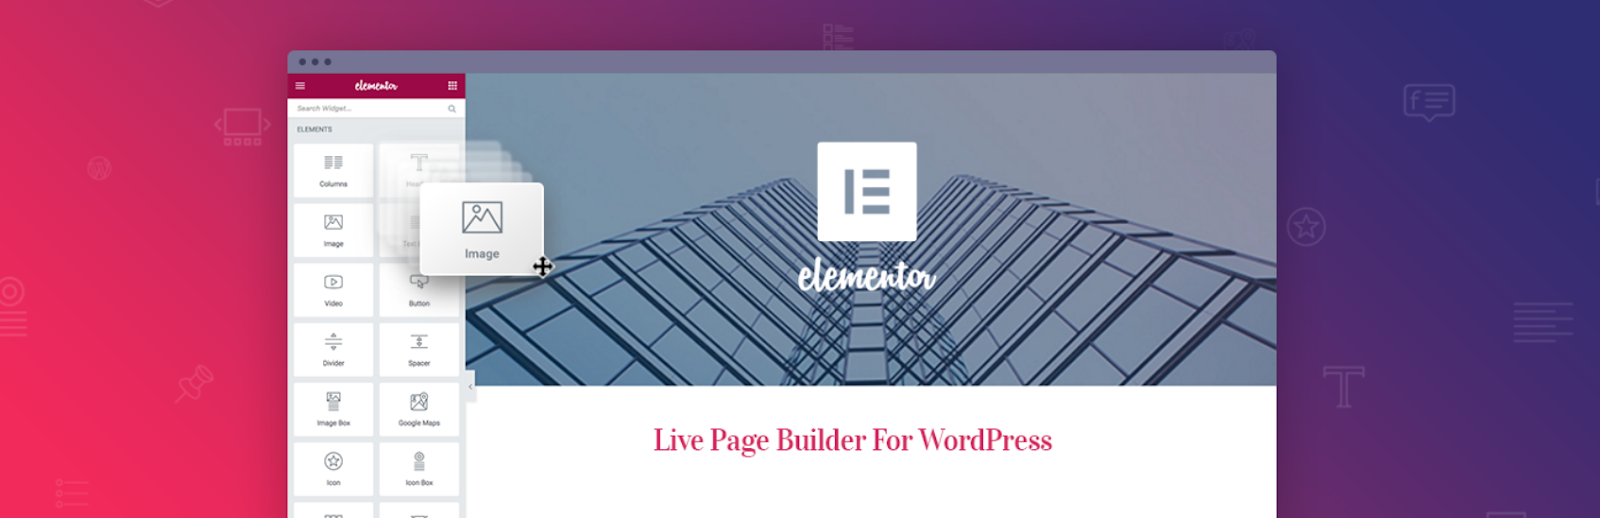 best wordpress plugin for building pages